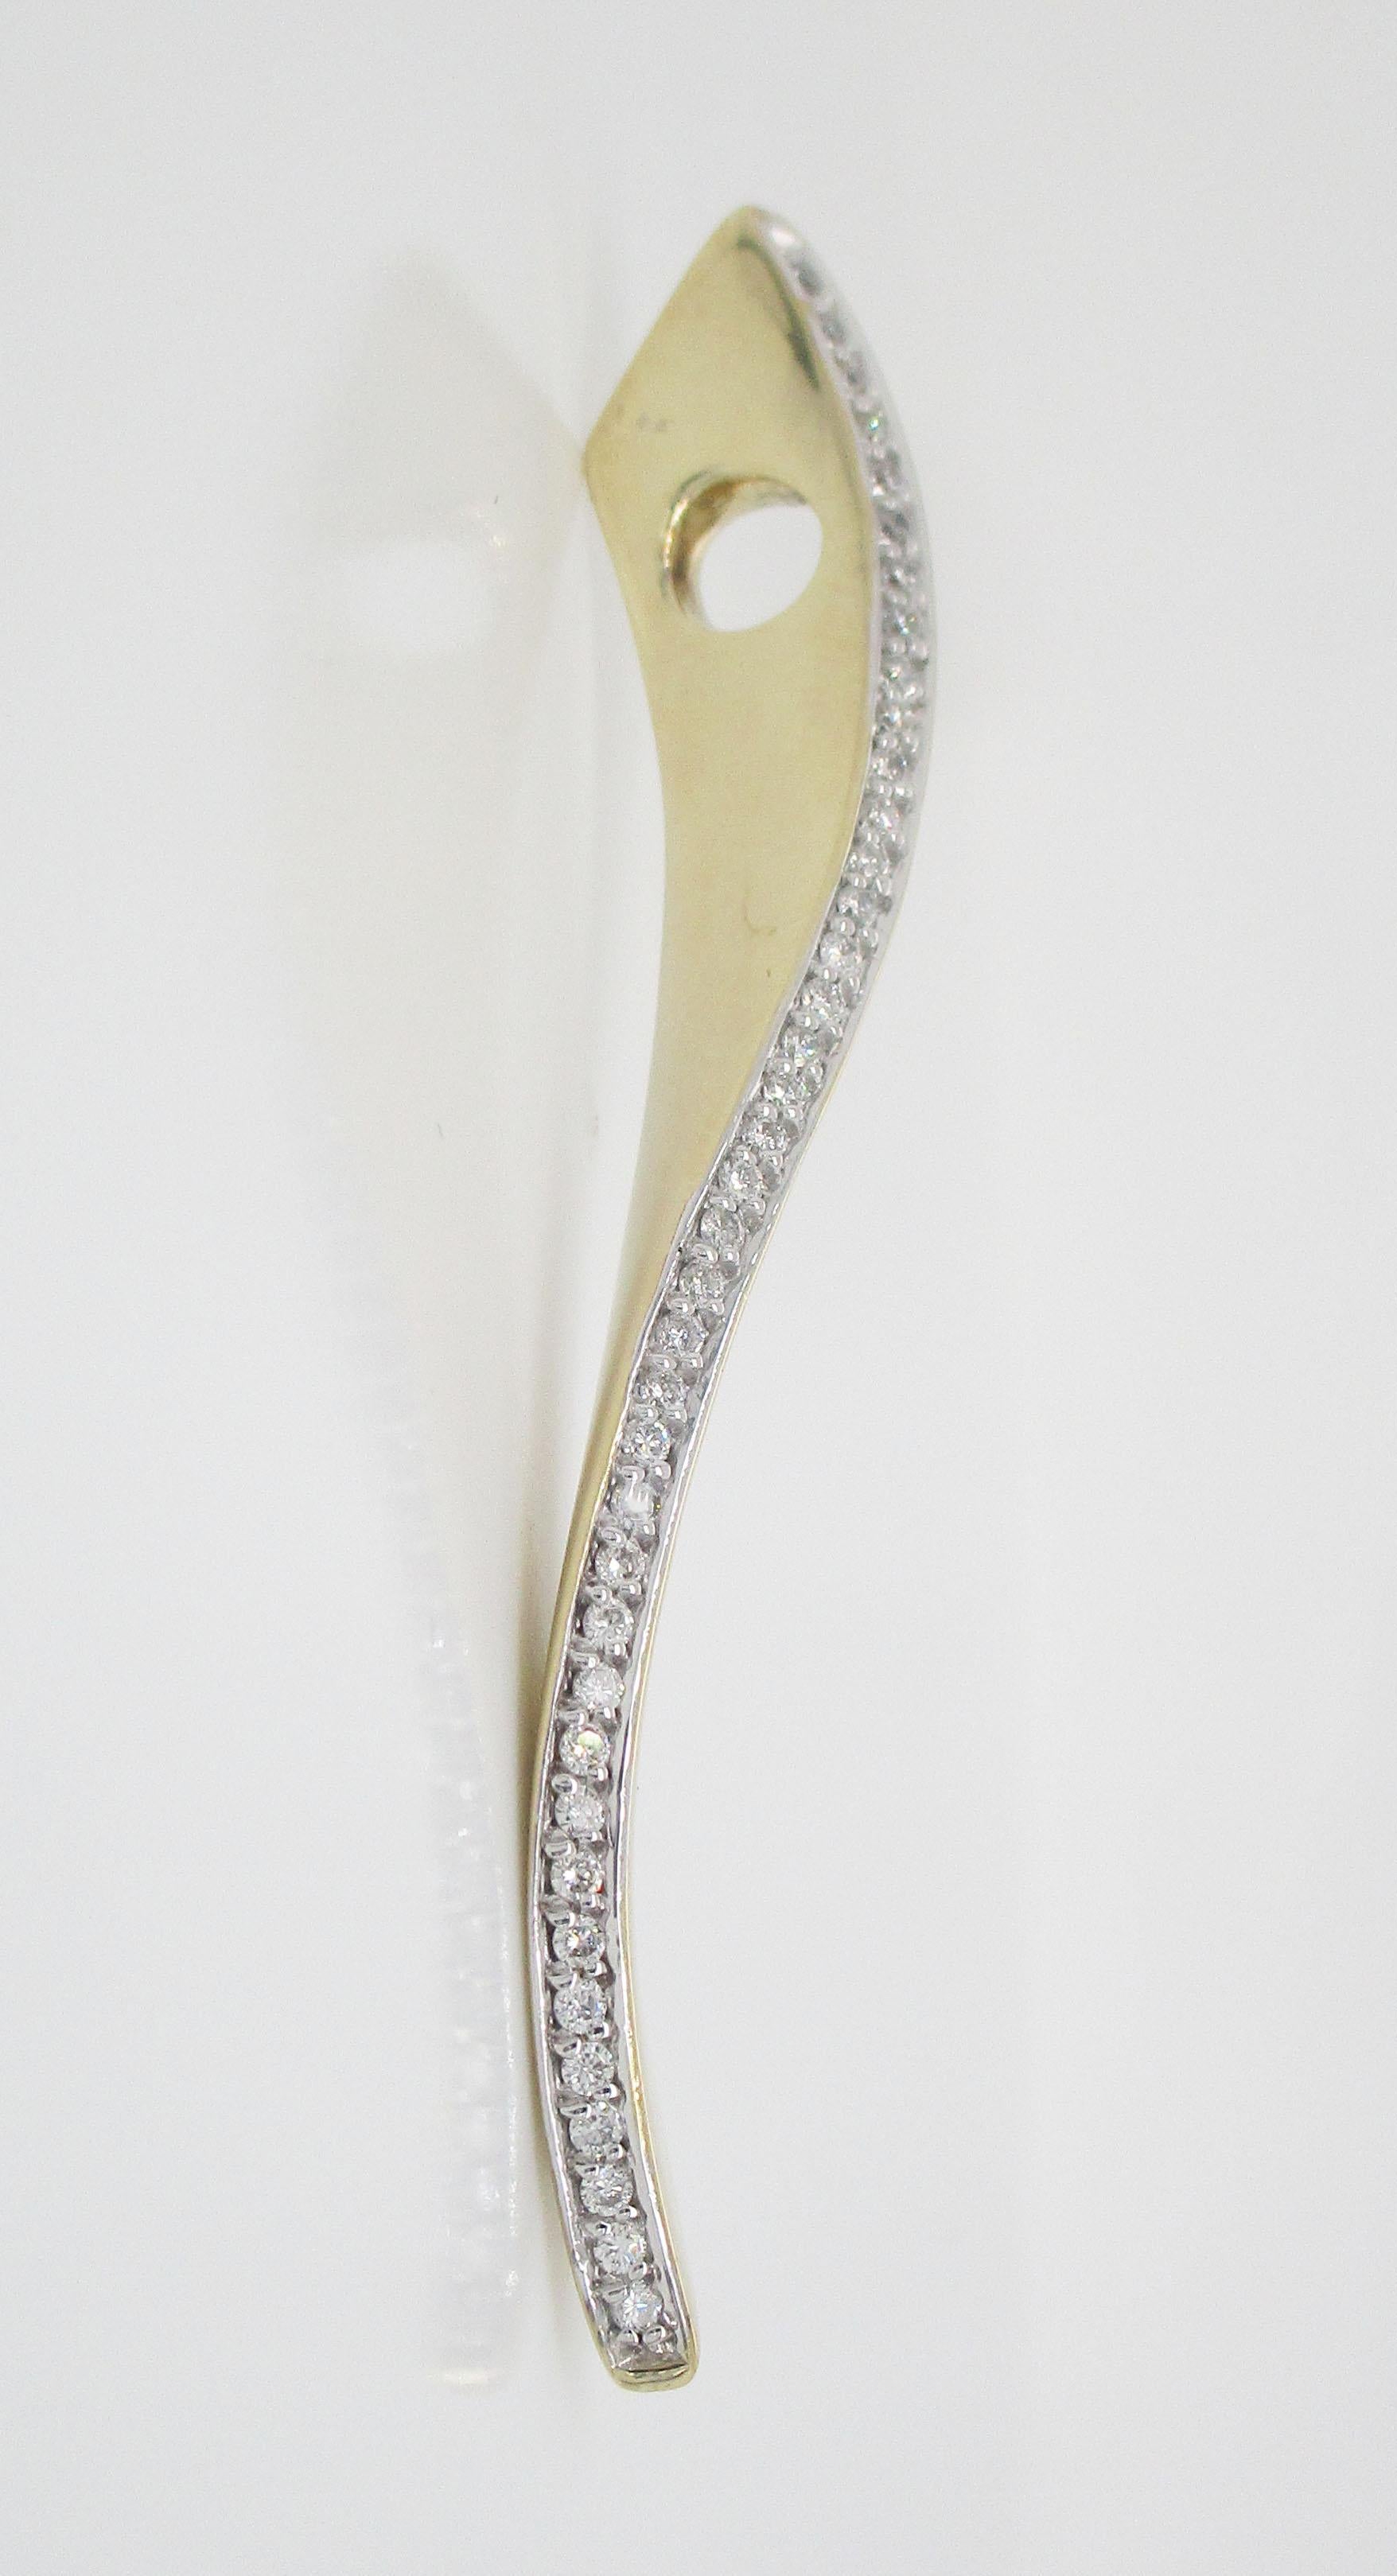 This is a beautiful pendant in 14k yellow gold with a stunning array of brilliant white diamonds! The unique design of the pendant features a wave design accented by a soft twist that makes this pendant both visually interesting and impossible to